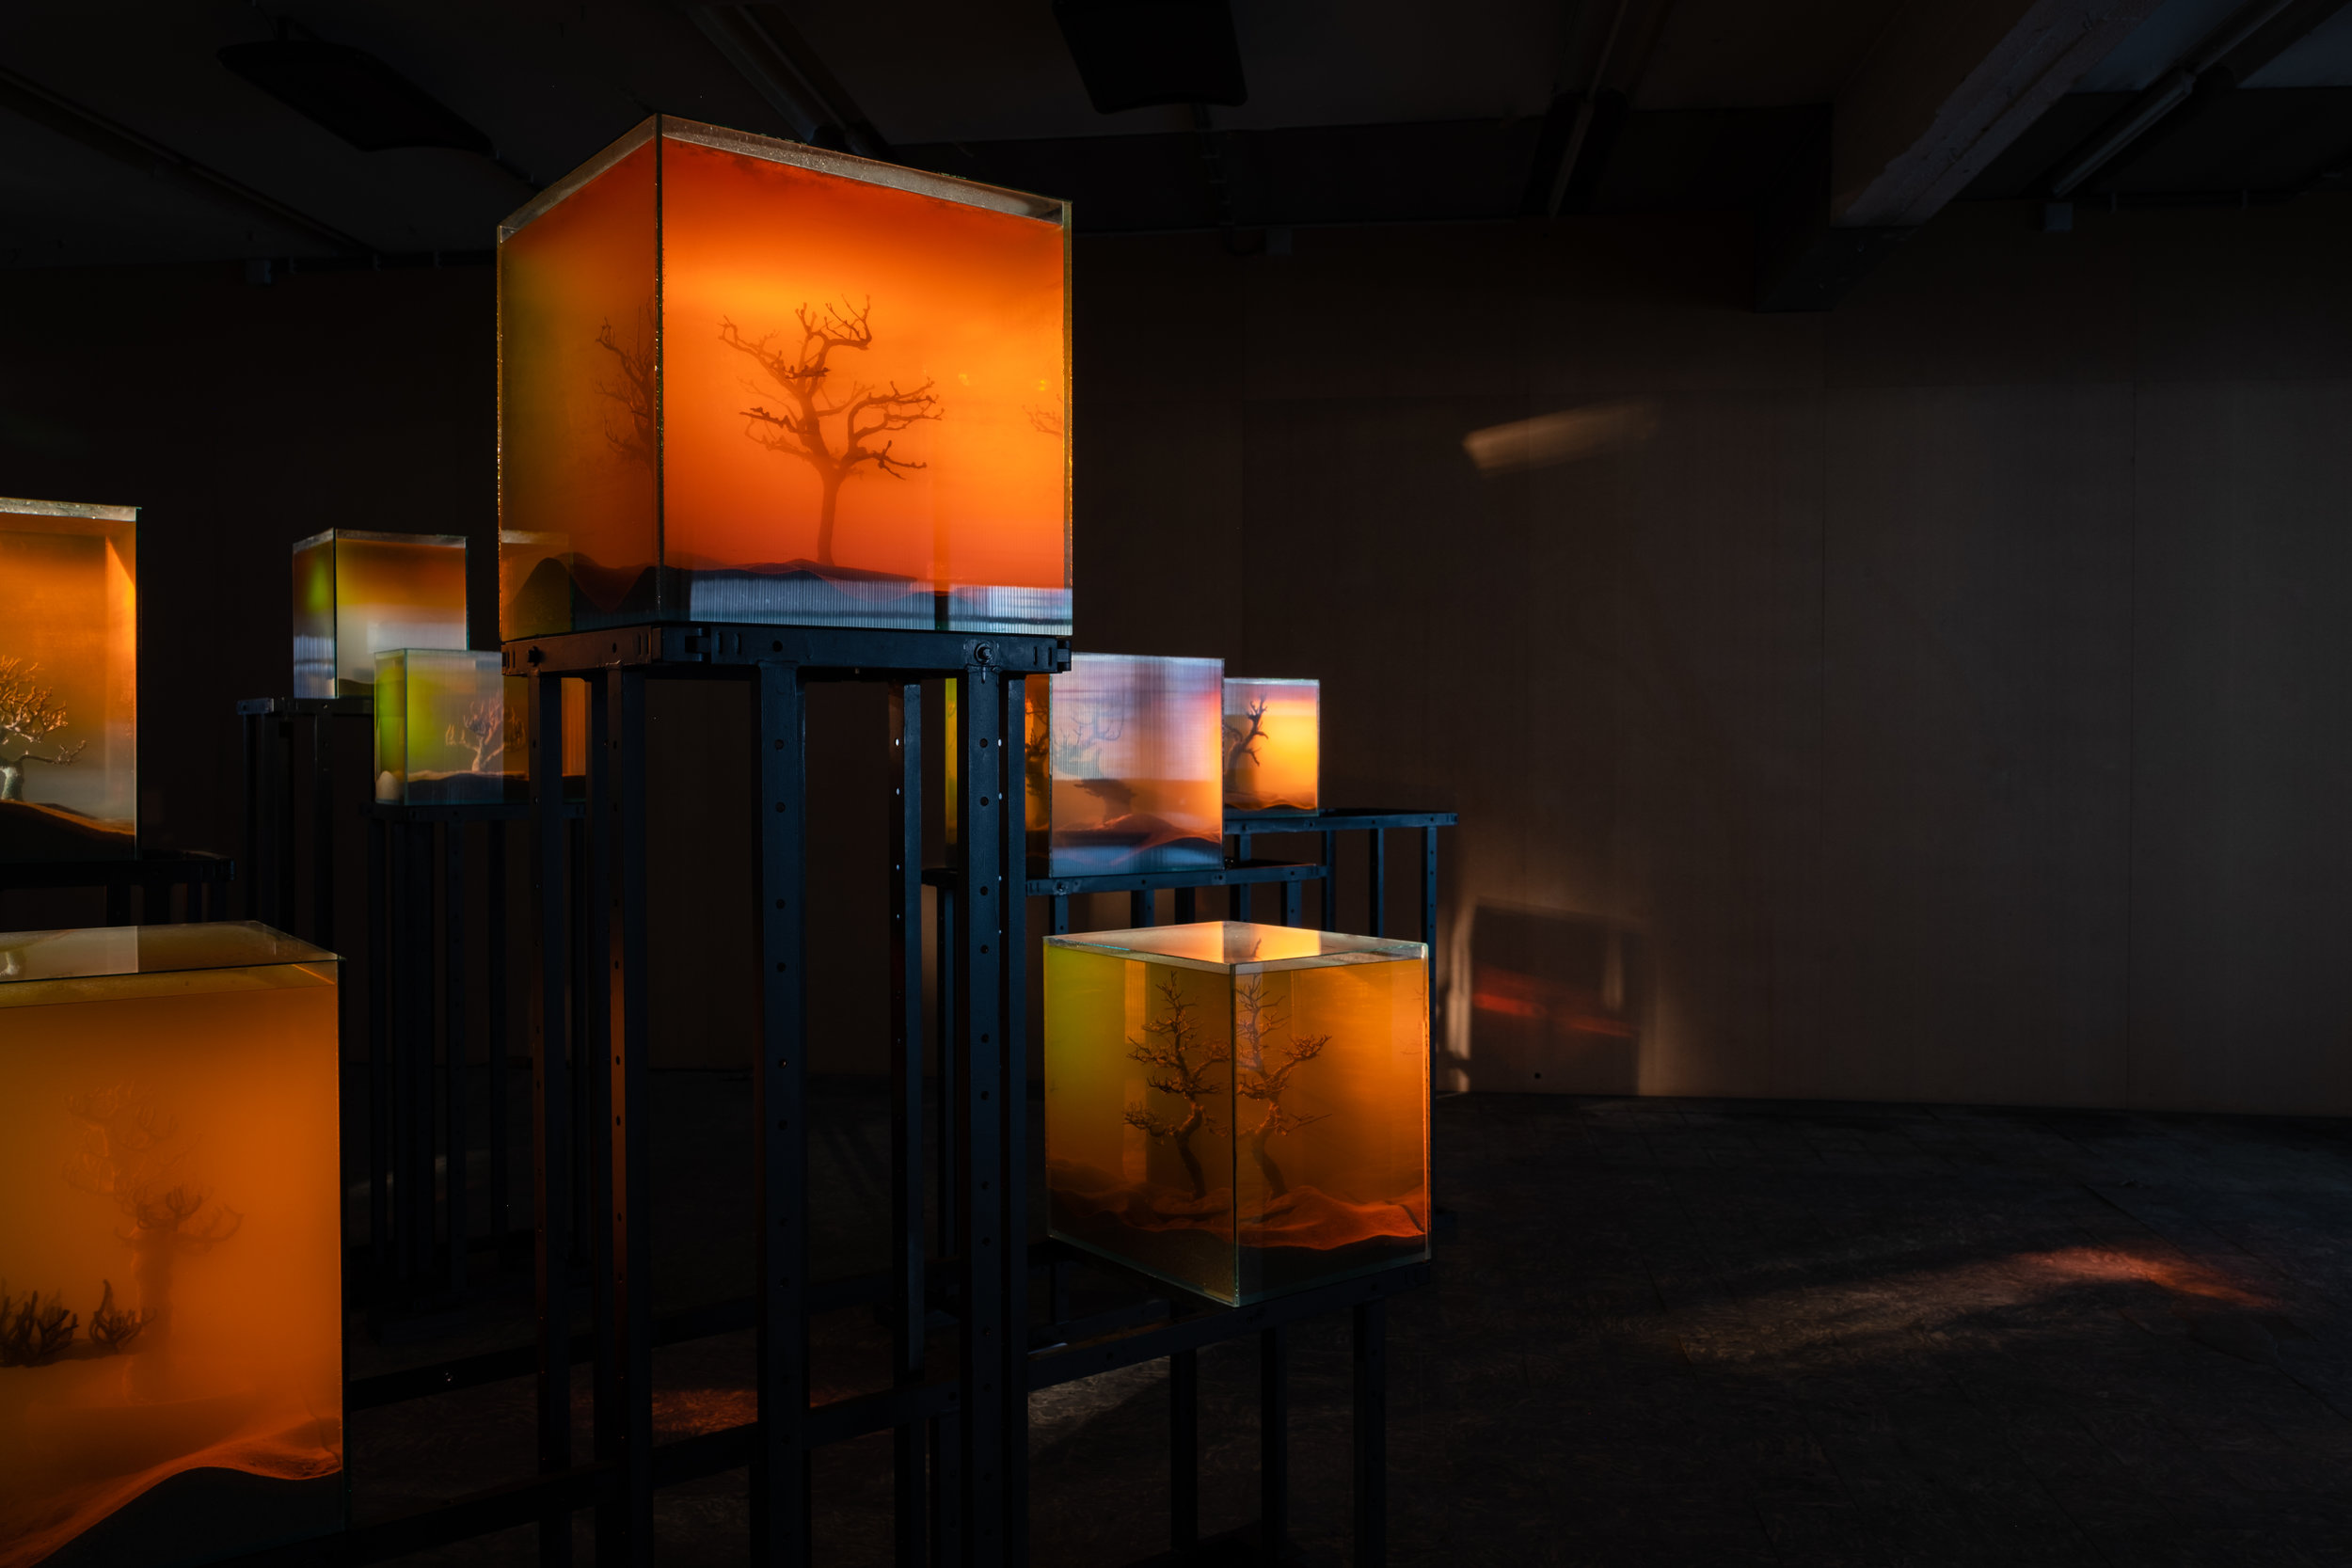 Various Artists, ‘toxiThropea.sunset’ (2019), in ‘Deadly Affairs’ (23.03-30.06.2019), Kunsthal Extra City, Antwerp, photo by Tomas Uyttendaele_12.jpg